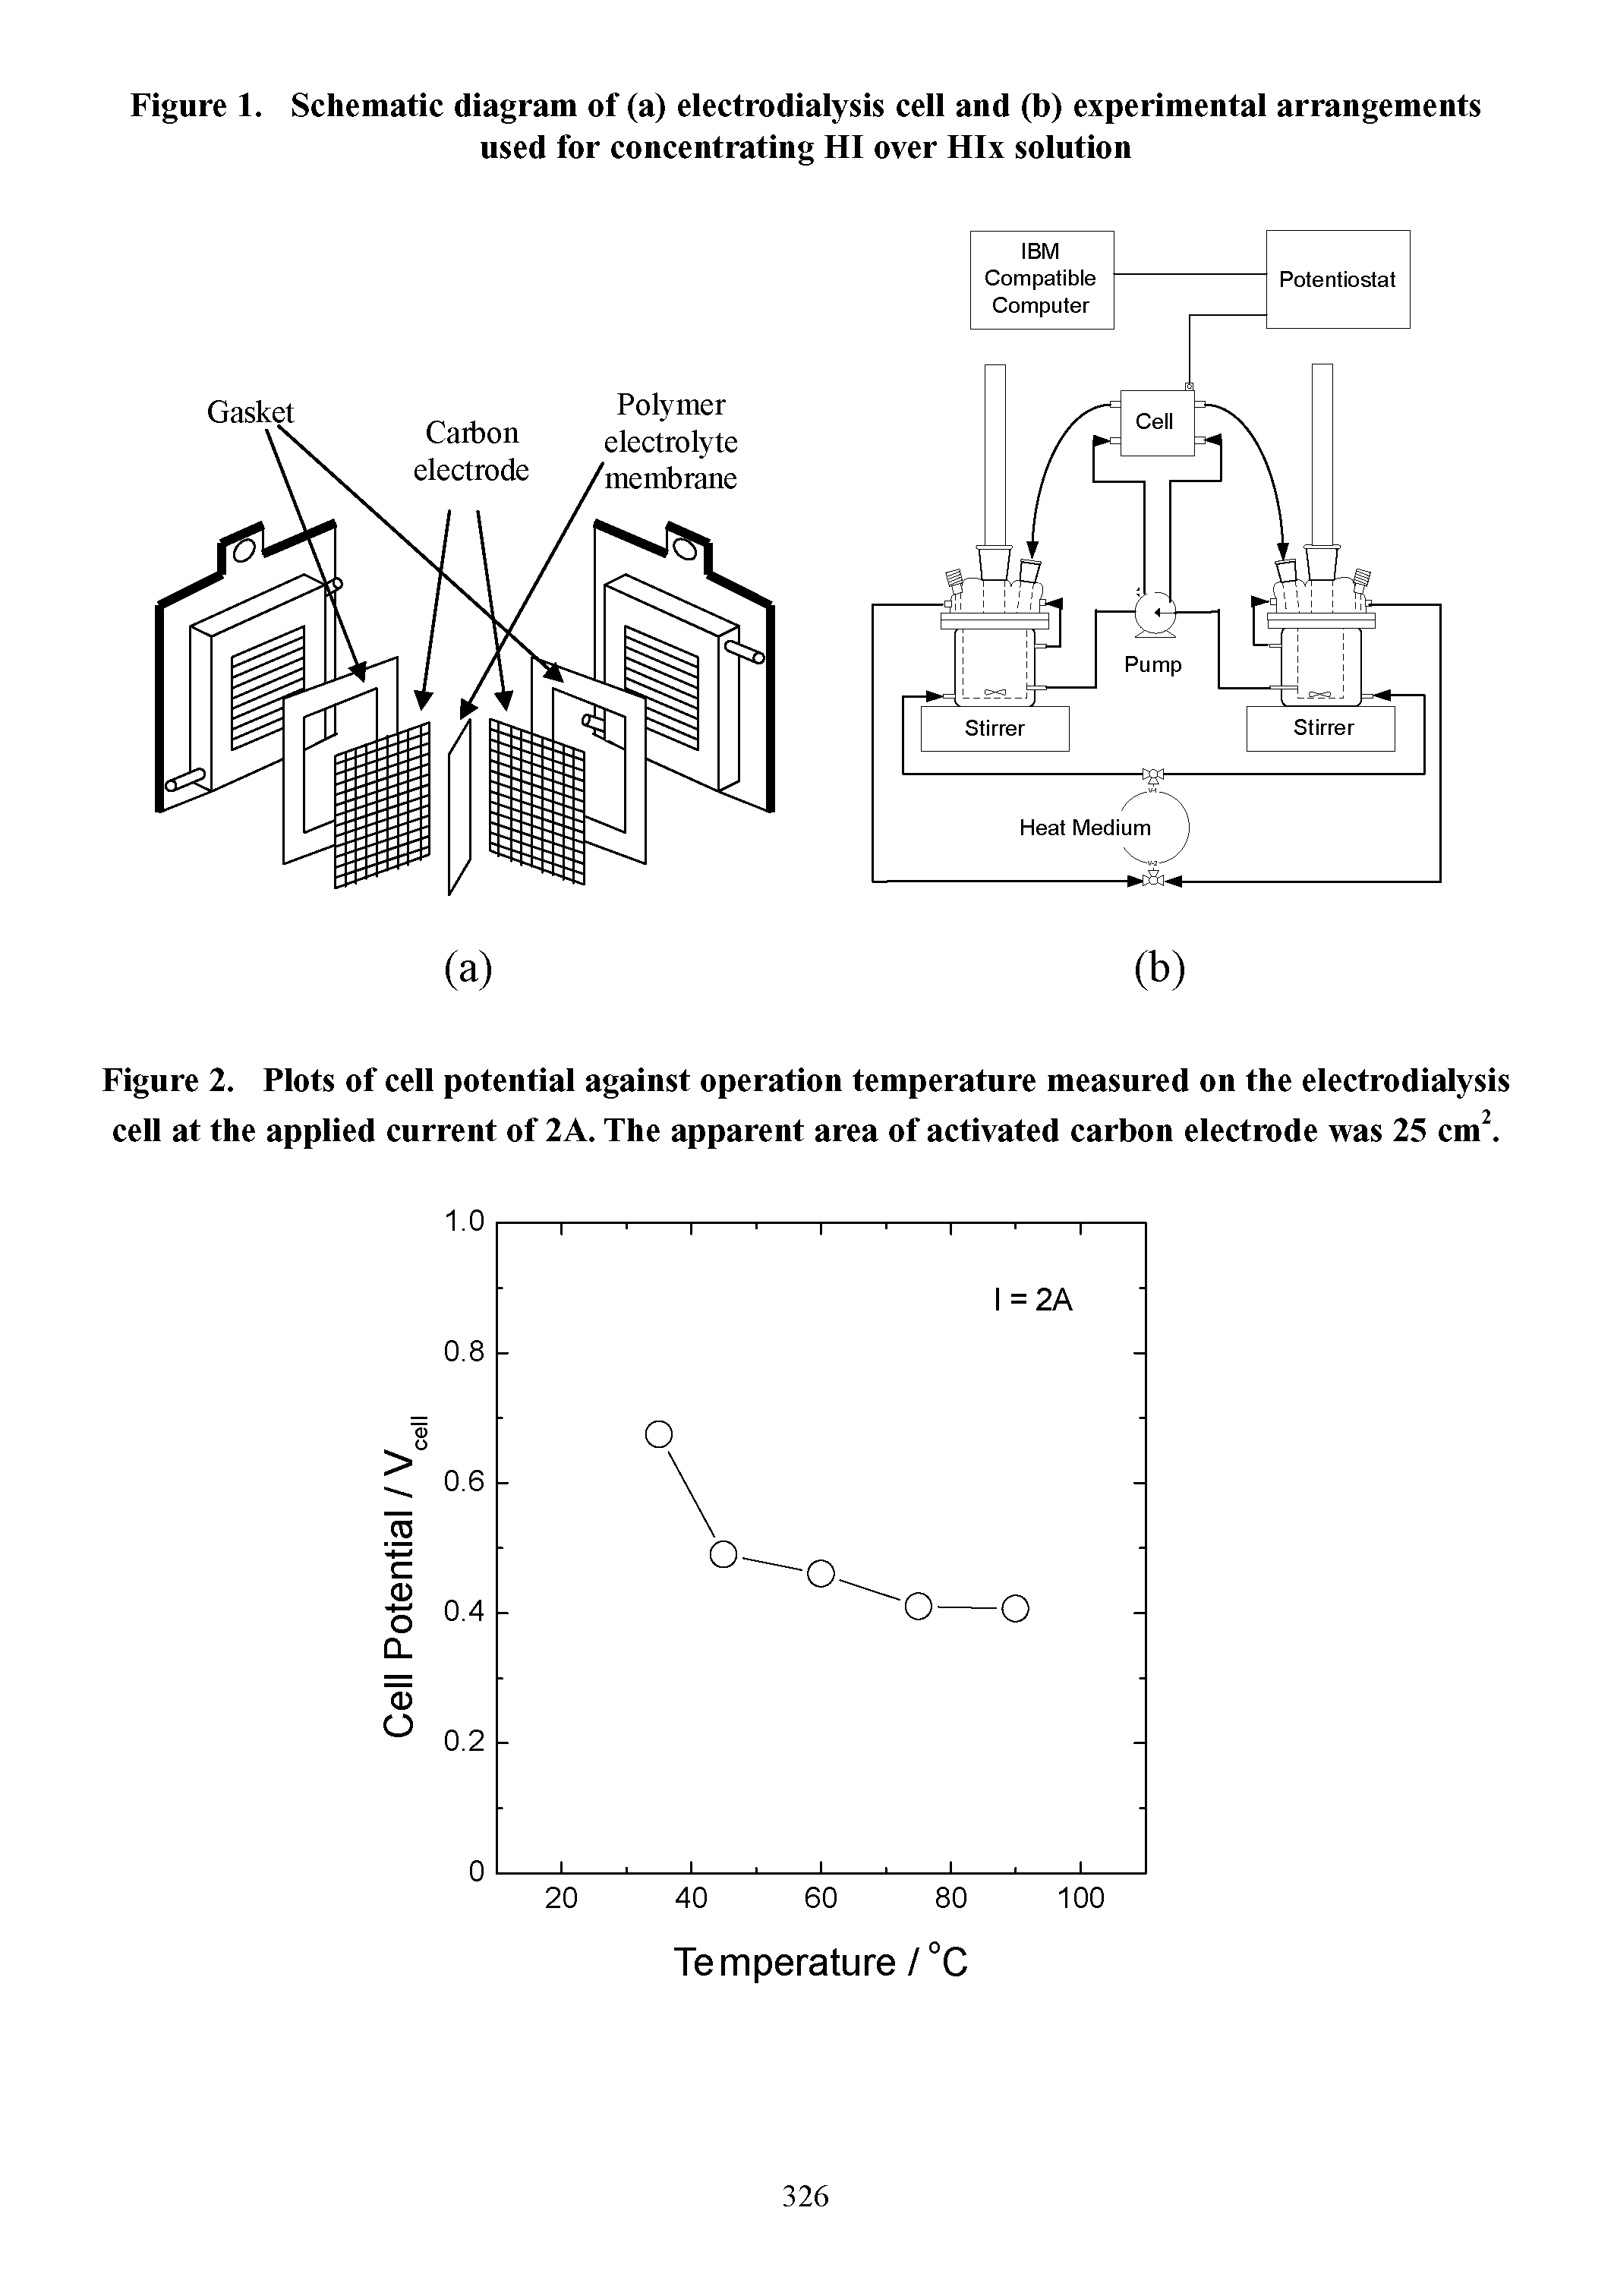 Figure 2. Plots of cell potential against operation temperature measured on the electrodialysis cell at the applied current of 2A. The apparent area of activated carbon electrode was 25 cm ...